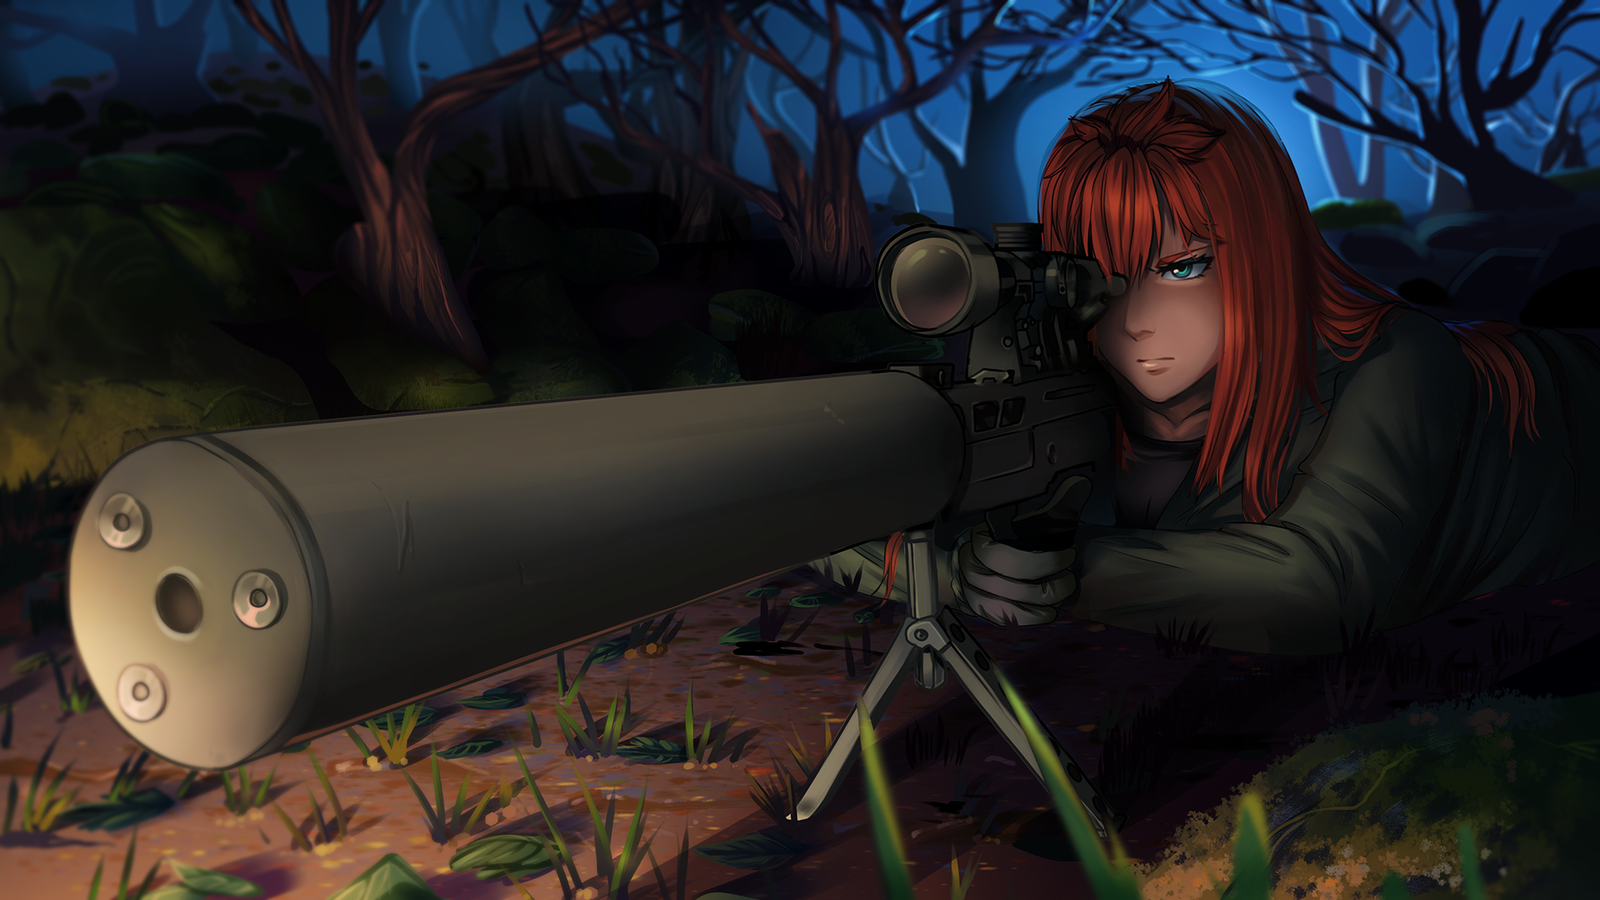 The enemy will never know where the shot was fired from :) - Endless summer, Ulyana, Two Guardians, , Visual novel, Fashion